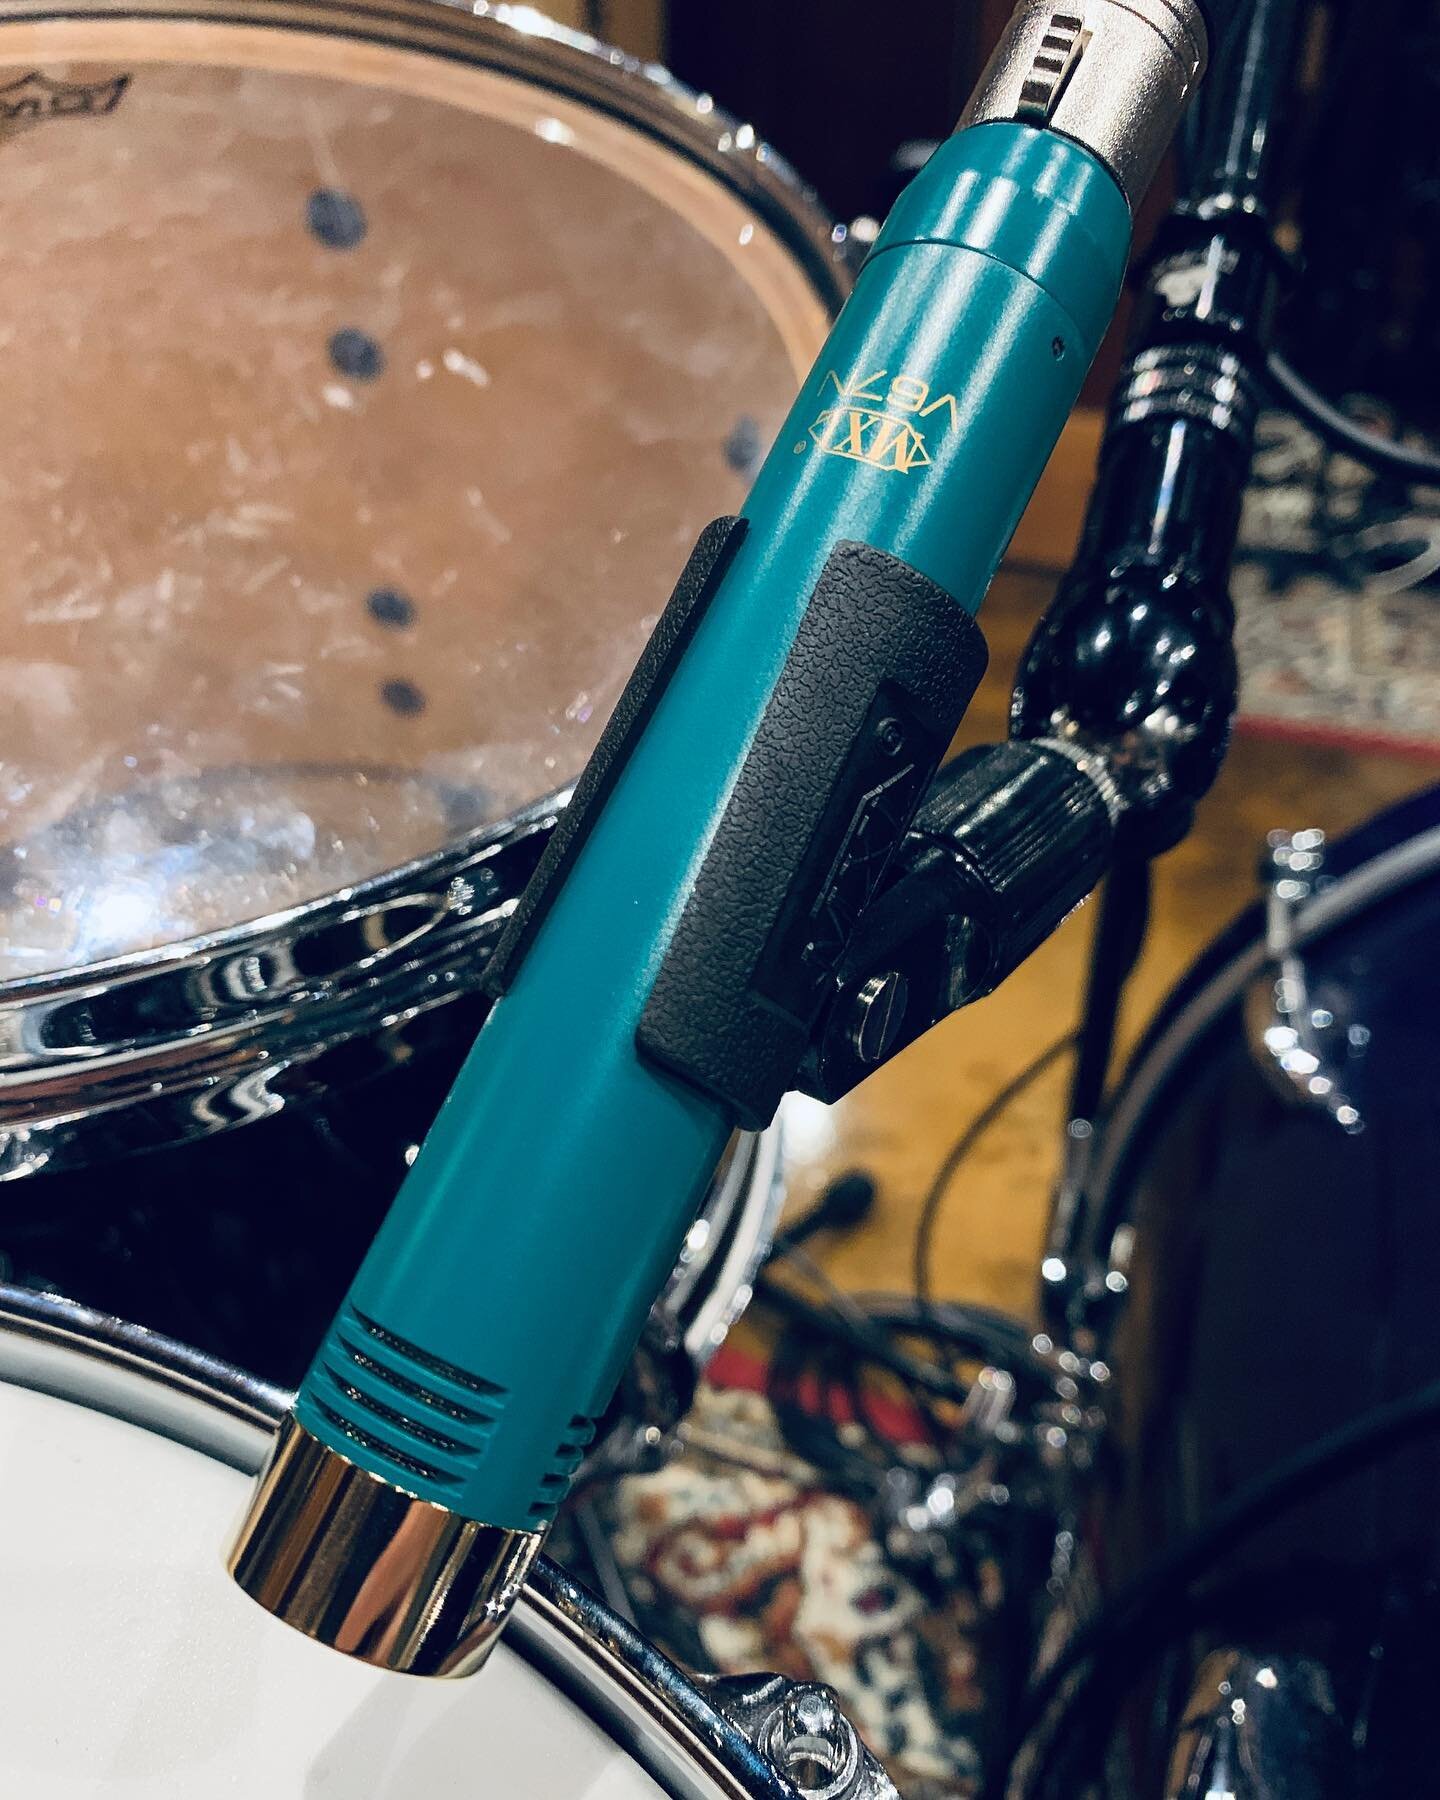 The @mxlmics V67N is a incredible sounding sdc condenser, even without considering it&rsquo;s low price! Perfect for snares, overheads and live sound! Includes wooden case, Omni capsule and free shipping in NZ.

#stlproaudio